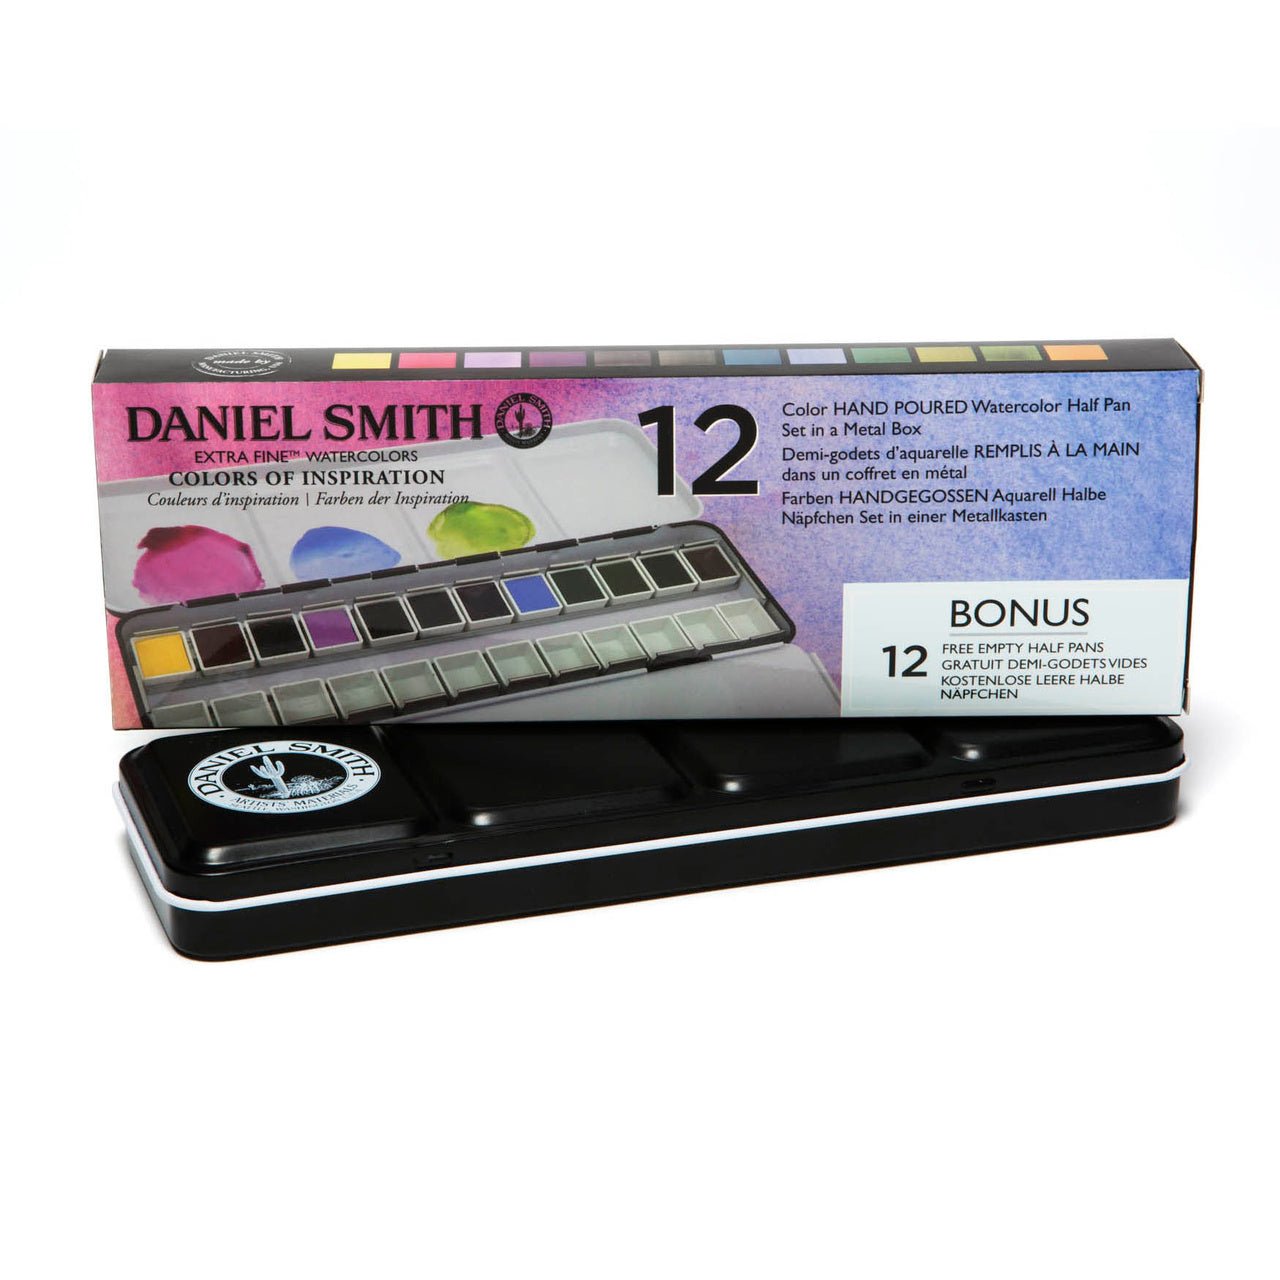 http://merriartist.com/cdn/shop/products/daniel-smith-extra-fine-watercolor-set-12-color-of-inspiration-hand-poured-half-pan-set-in-a-metal-box-with-bonus-12-empty-half-pans-238365.jpg?v=1671487574